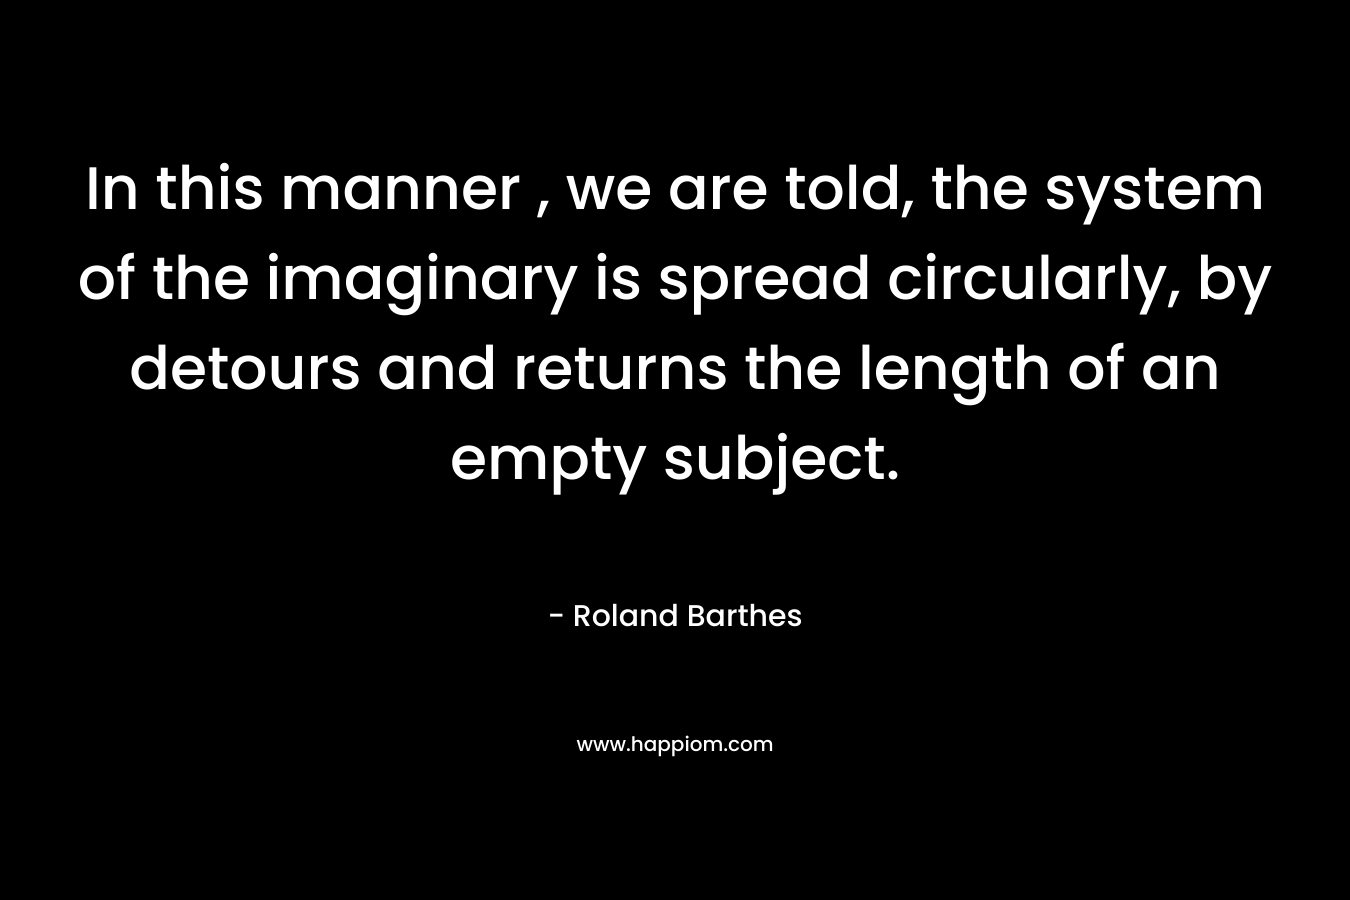 In this manner , we are told, the system of the imaginary is spread circularly, by detours and returns the length of an empty subject. – Roland Barthes